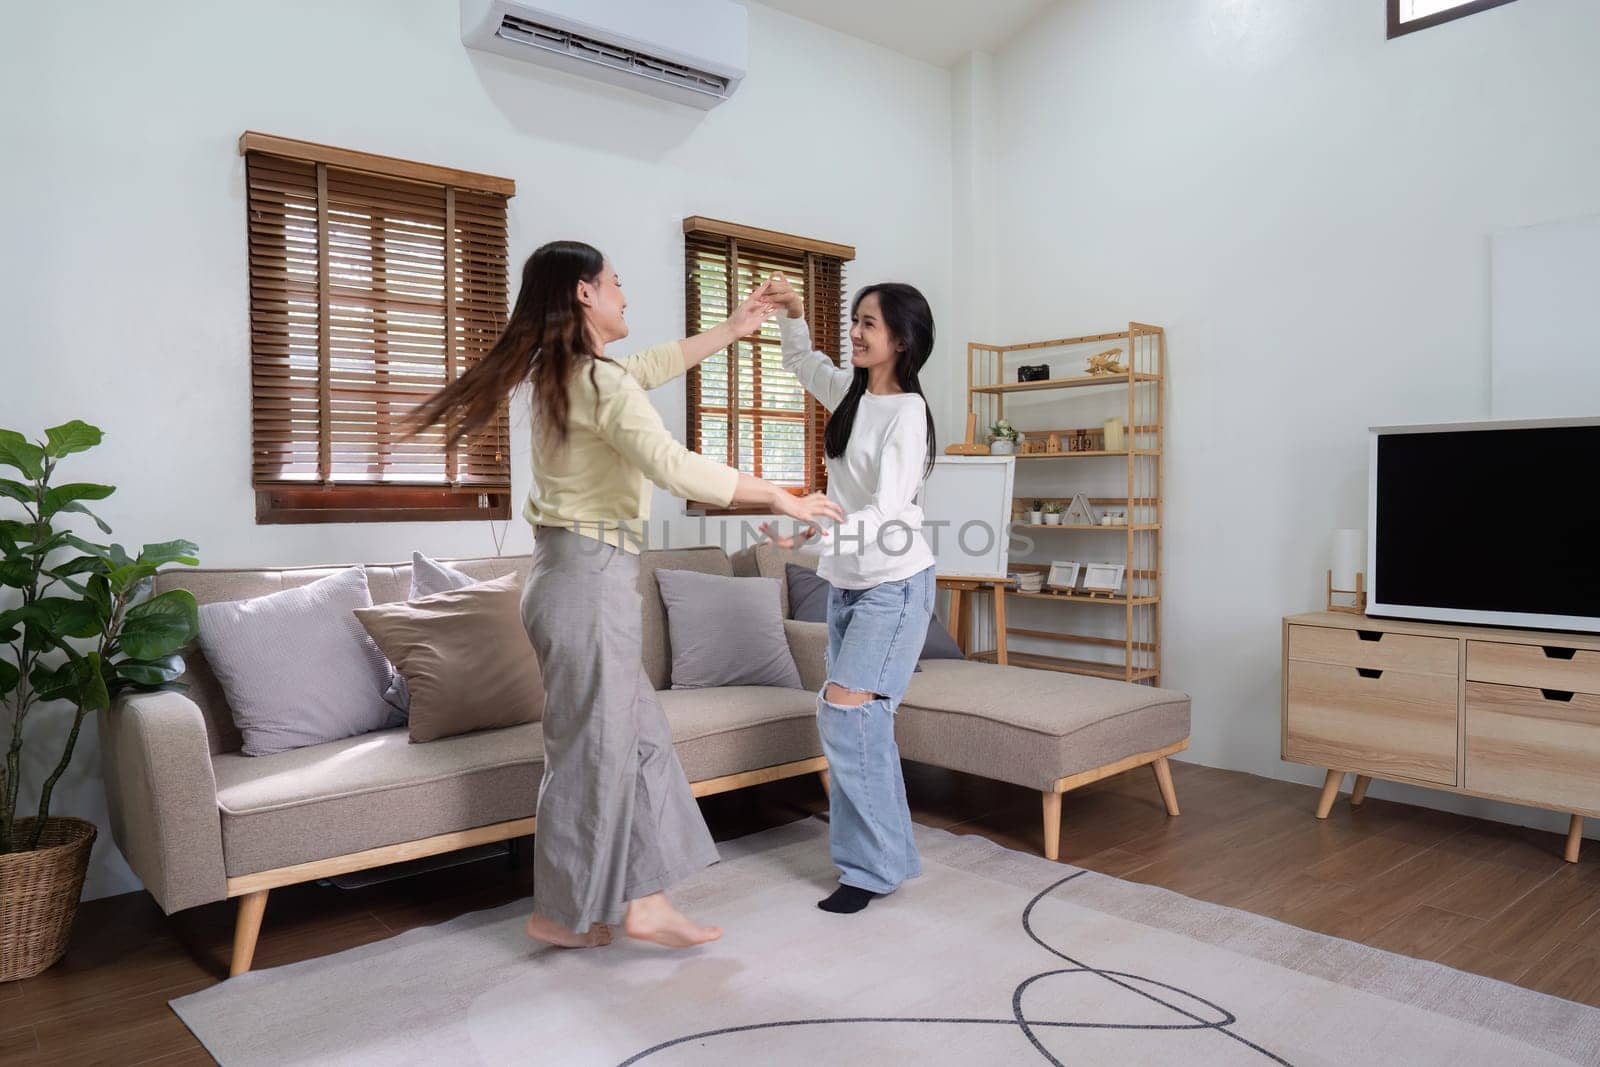 Lesbian asian couple dancing with each other while resting at the living room.